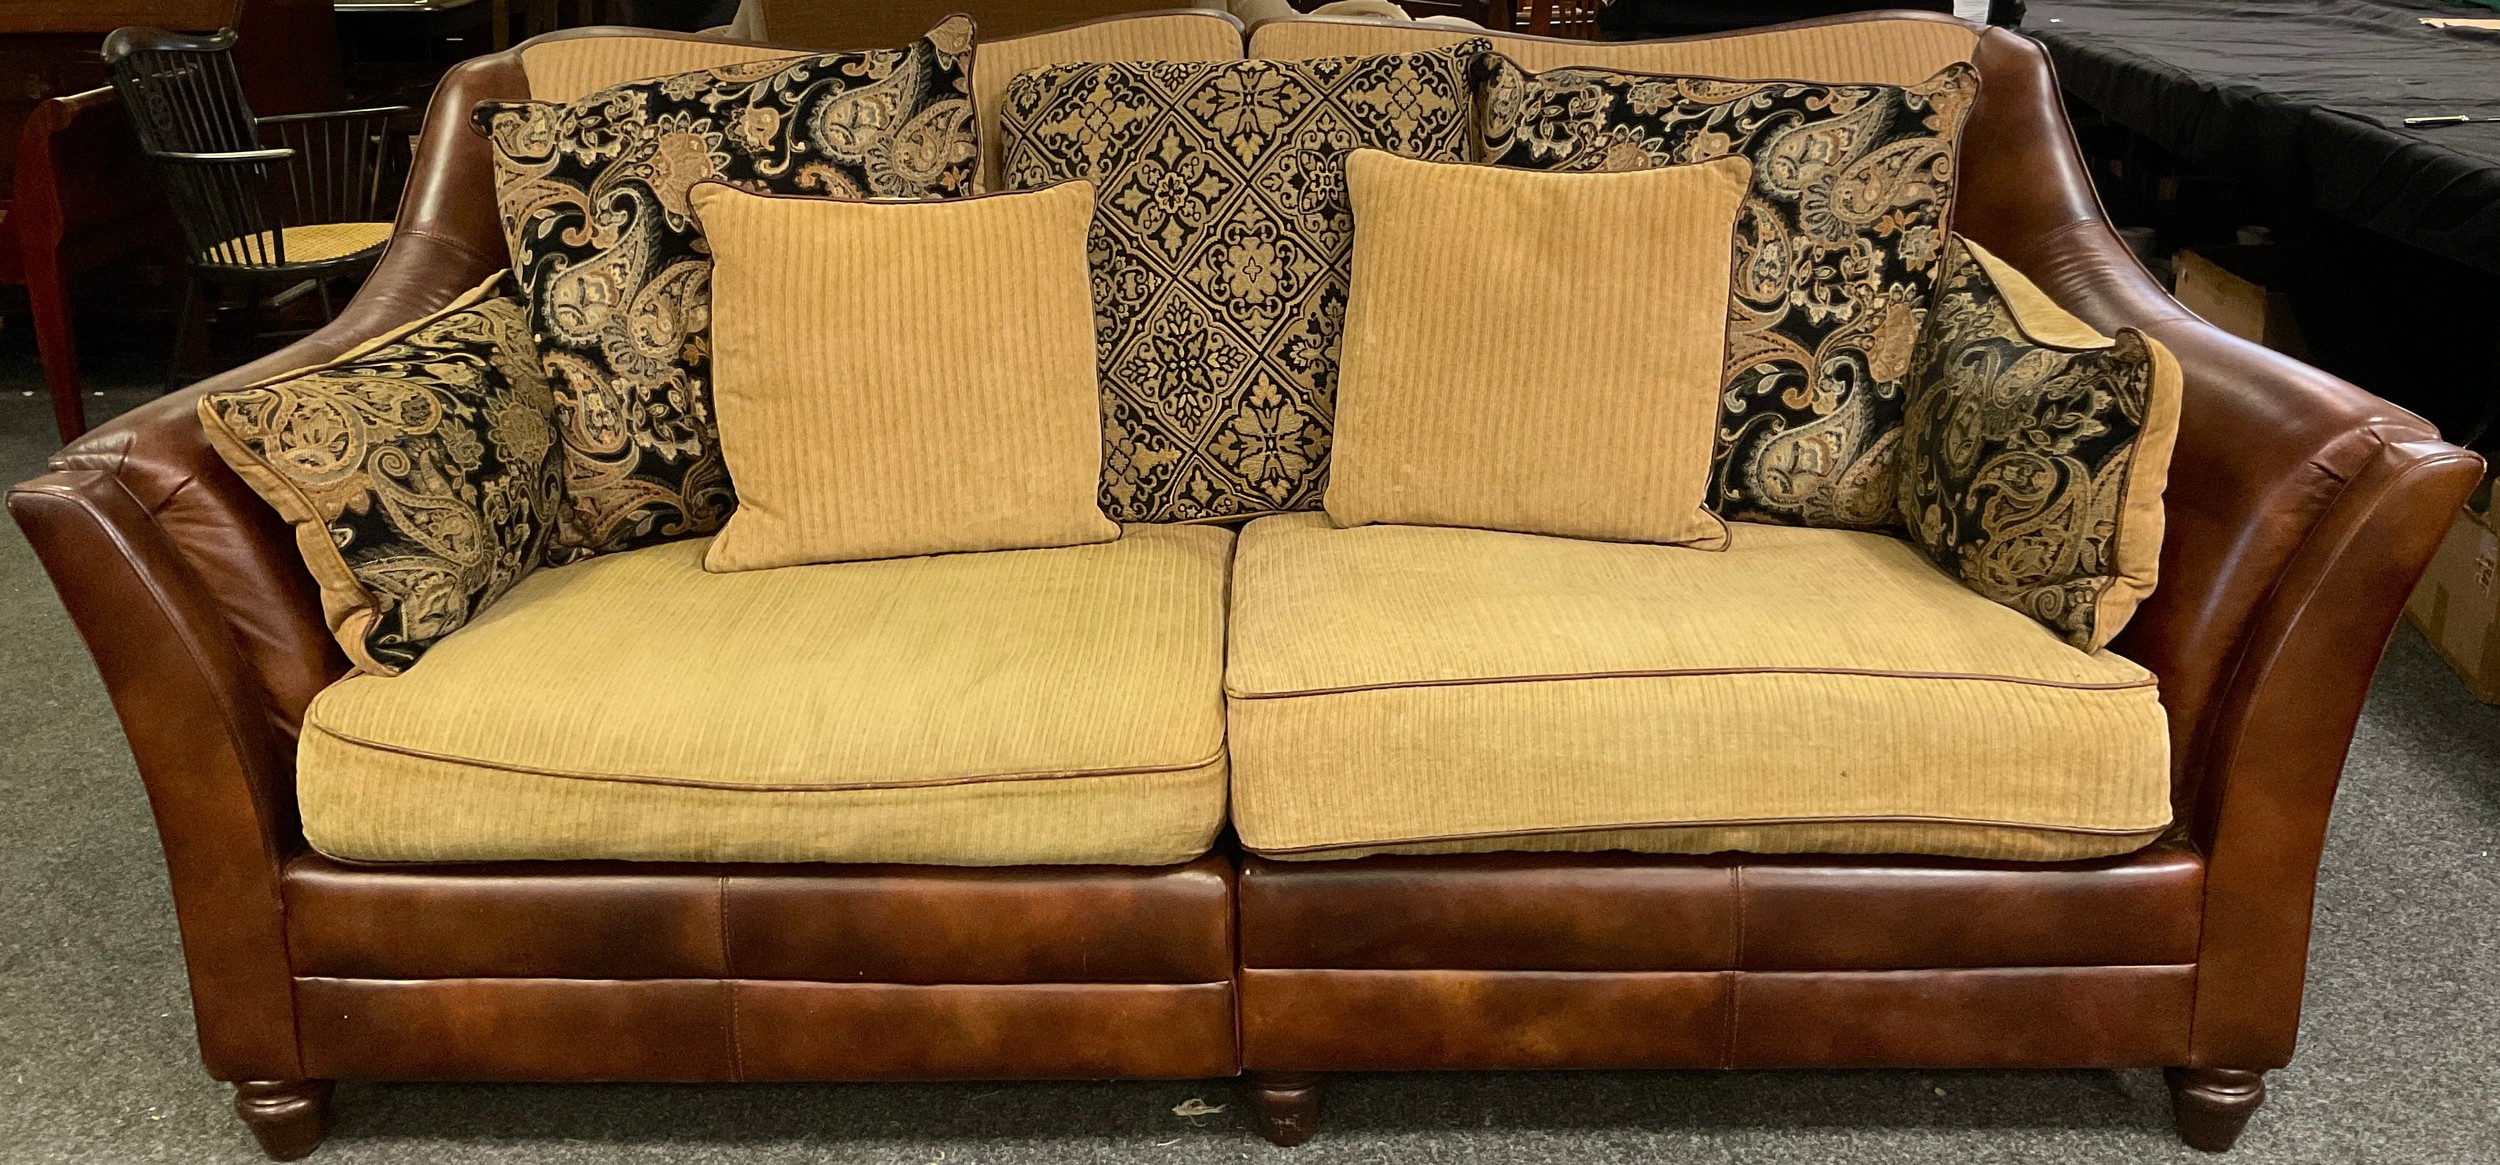 A Contemporary three seat tan leather and fabric sofa, and pair of matching armchairs, sofa - Image 2 of 2